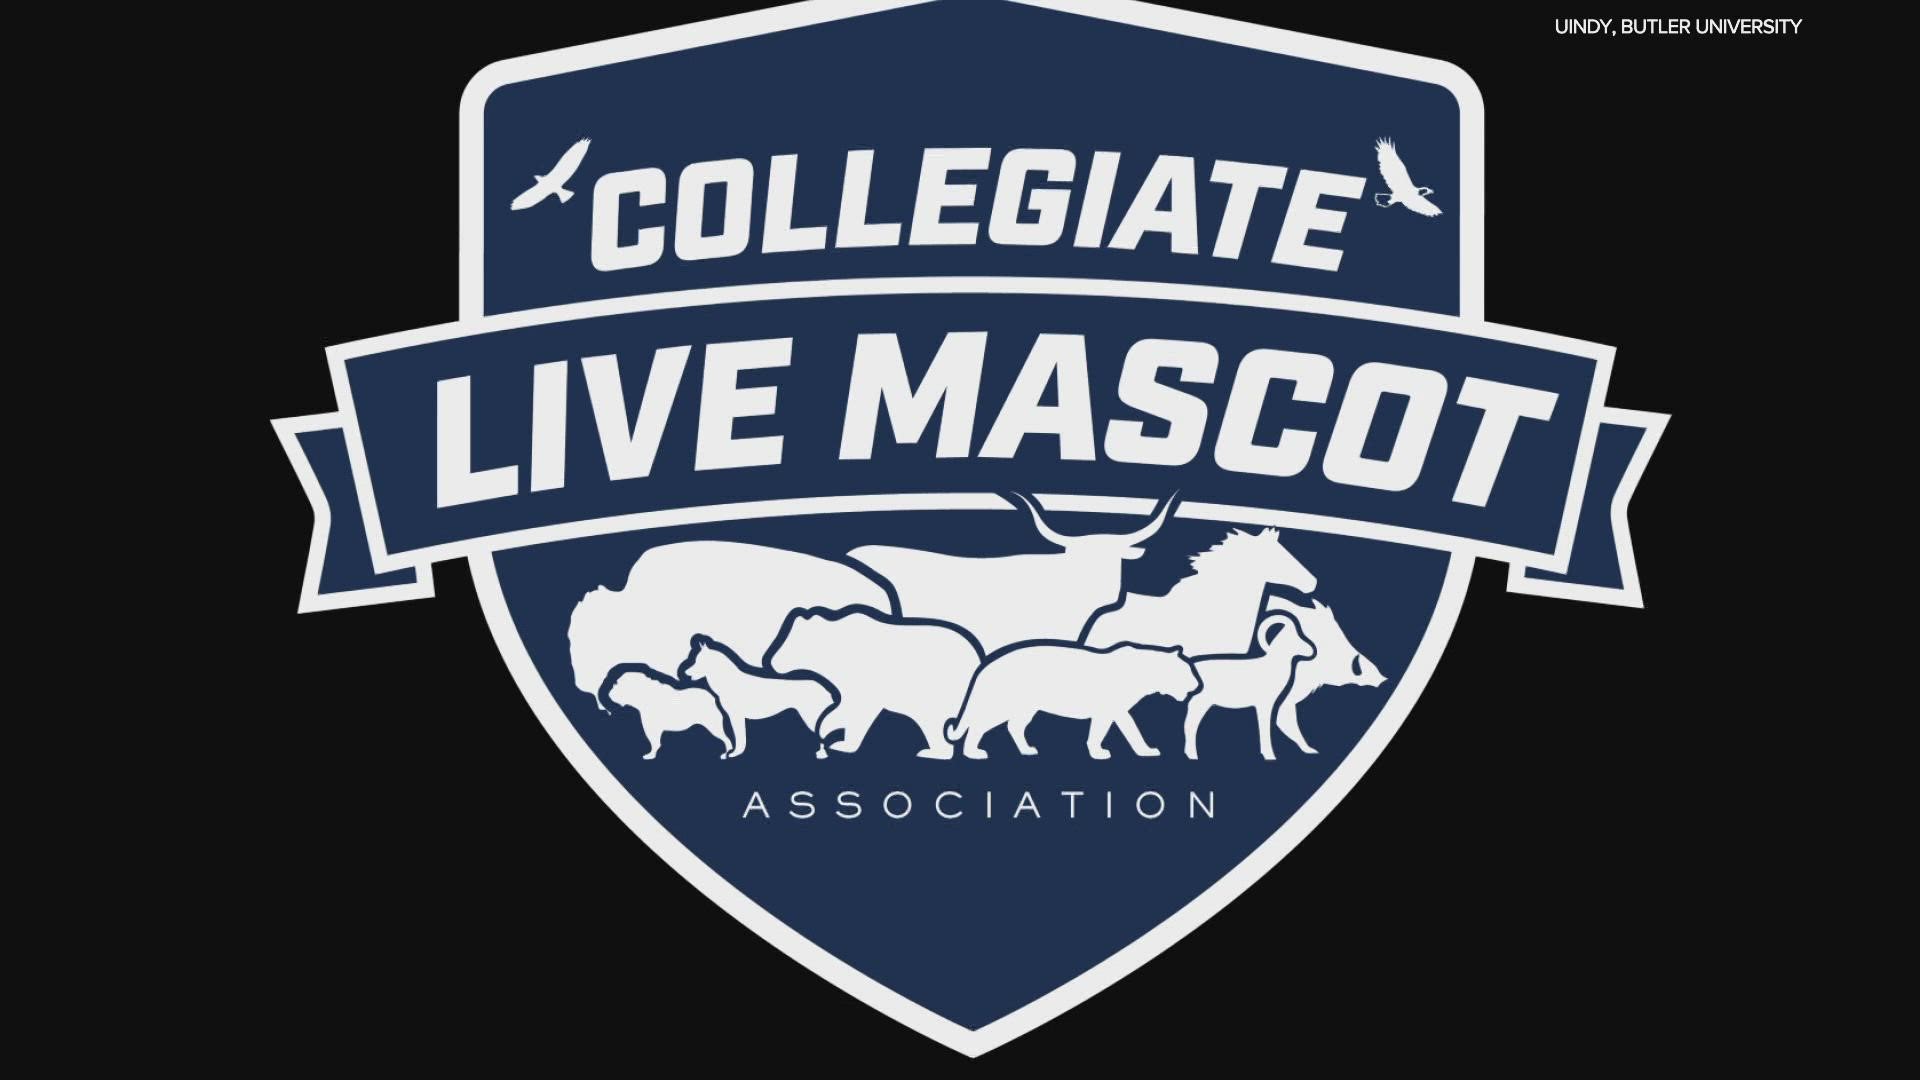 The University of Indianapolis and Butler University are hosting the National Collegiate Live Mascot Conference.